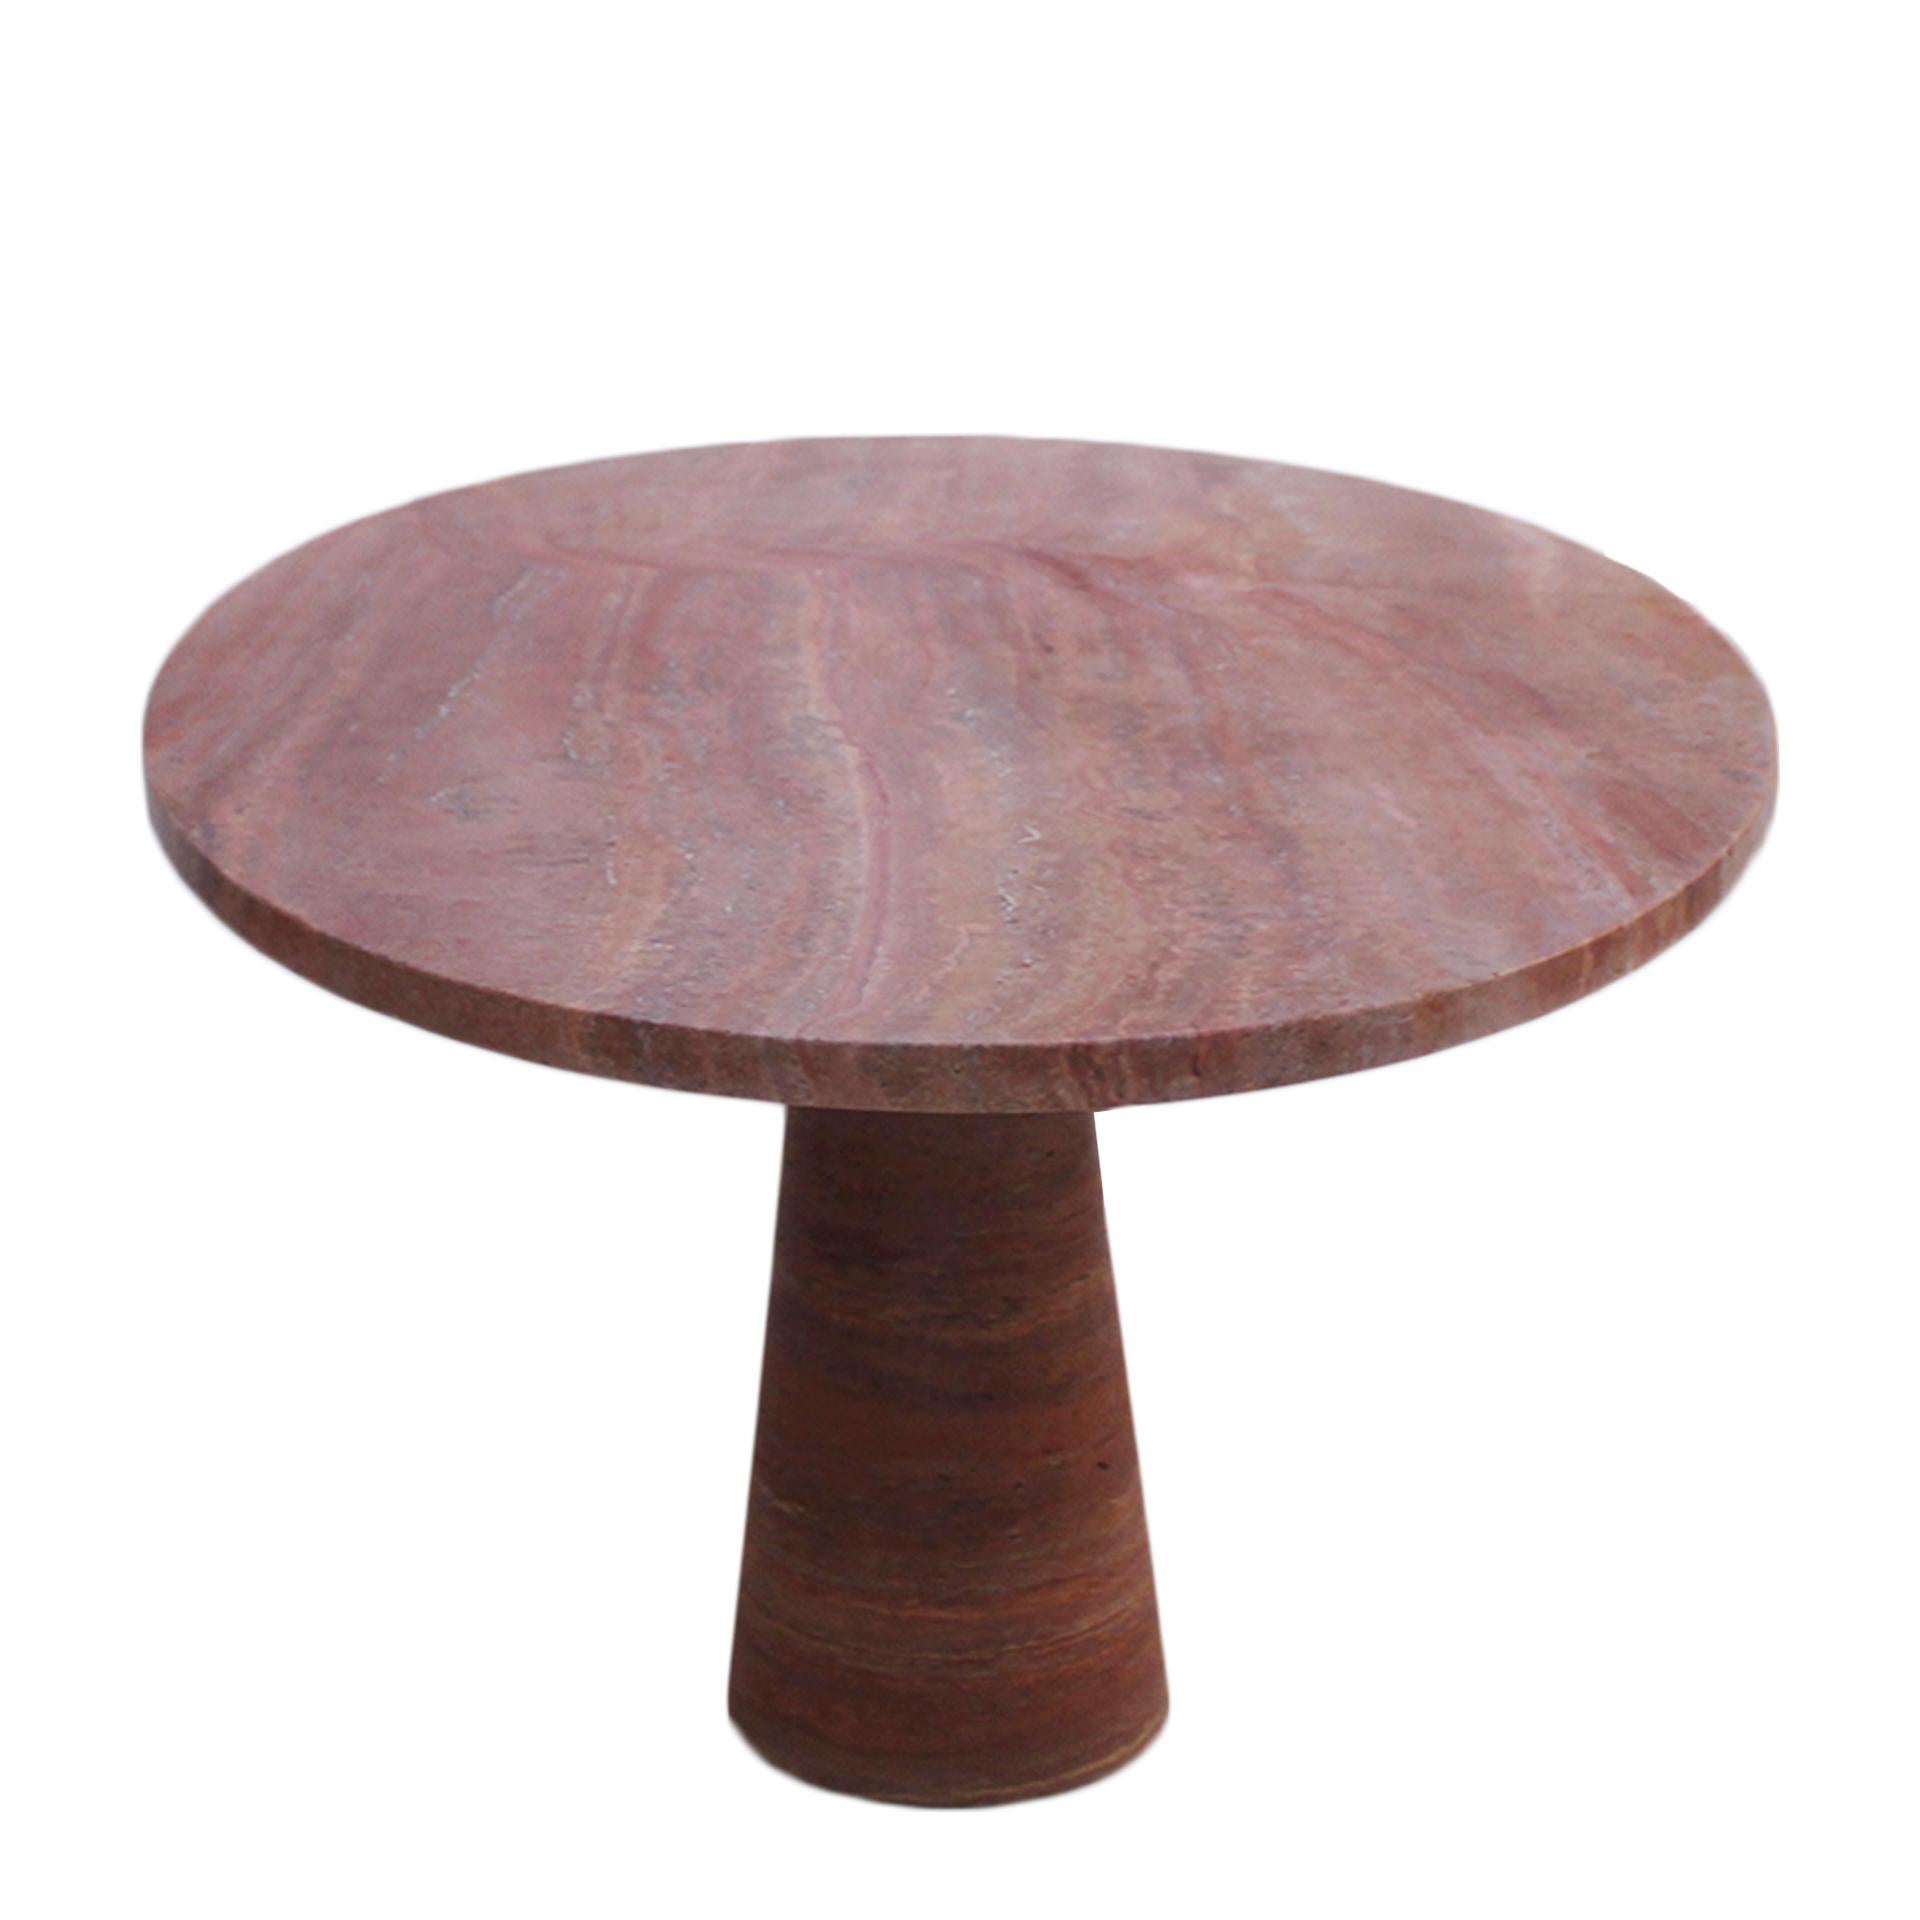 Travertine Italian Red Marble Persa Dining Table with Oval Top and Rounded Solid Legs For Sale